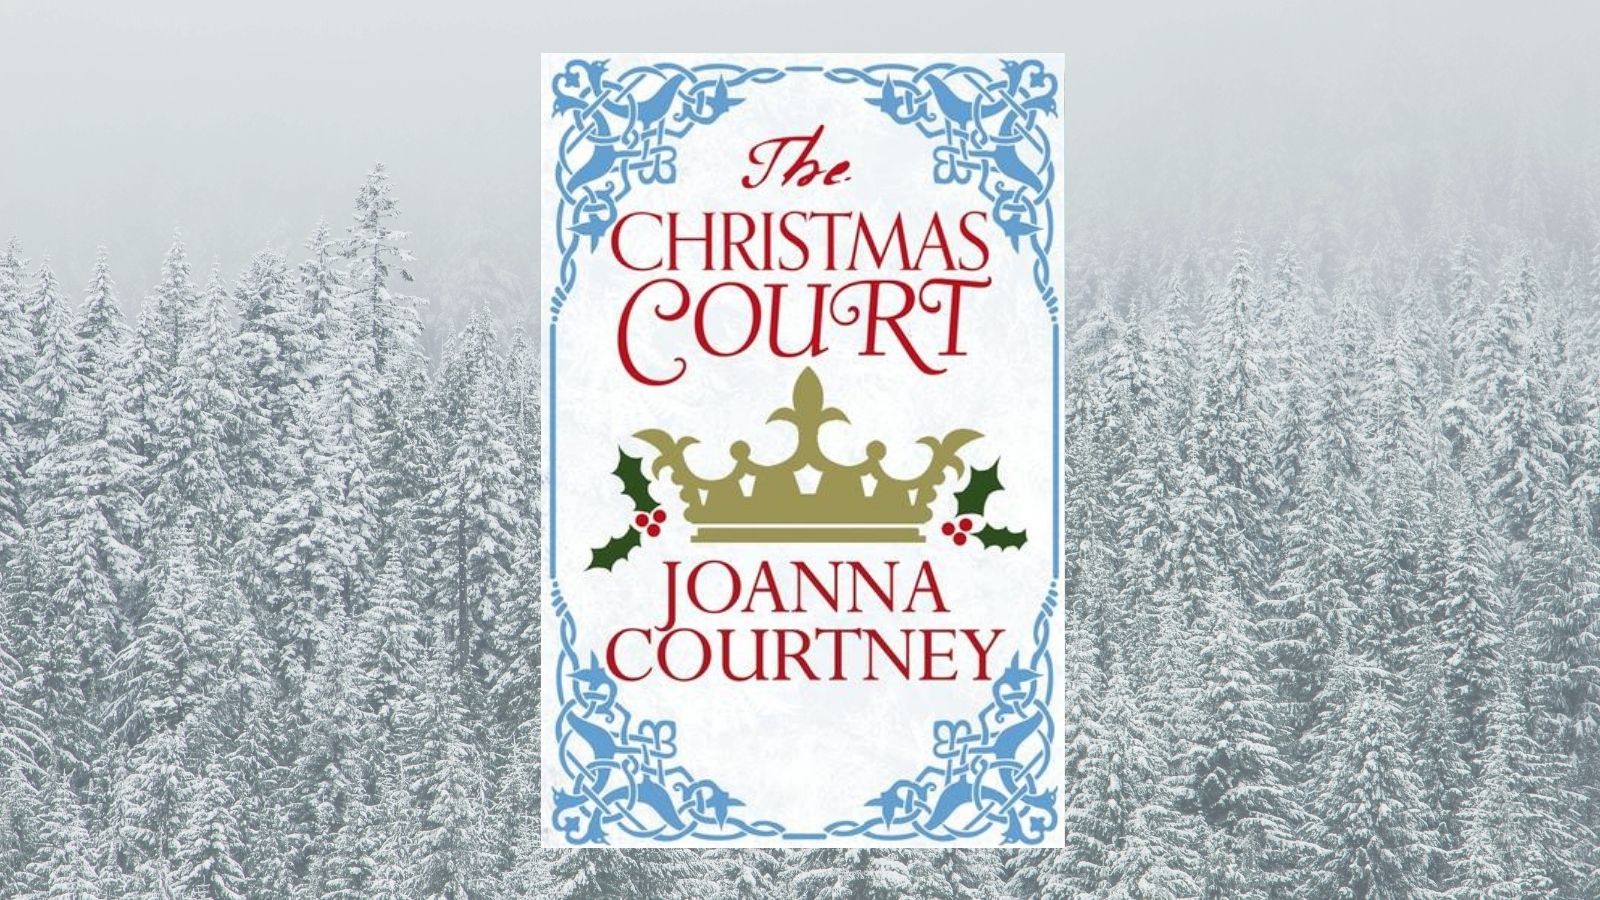 The Christmas Court by Joanna Courtney cover with a background of snowy trees